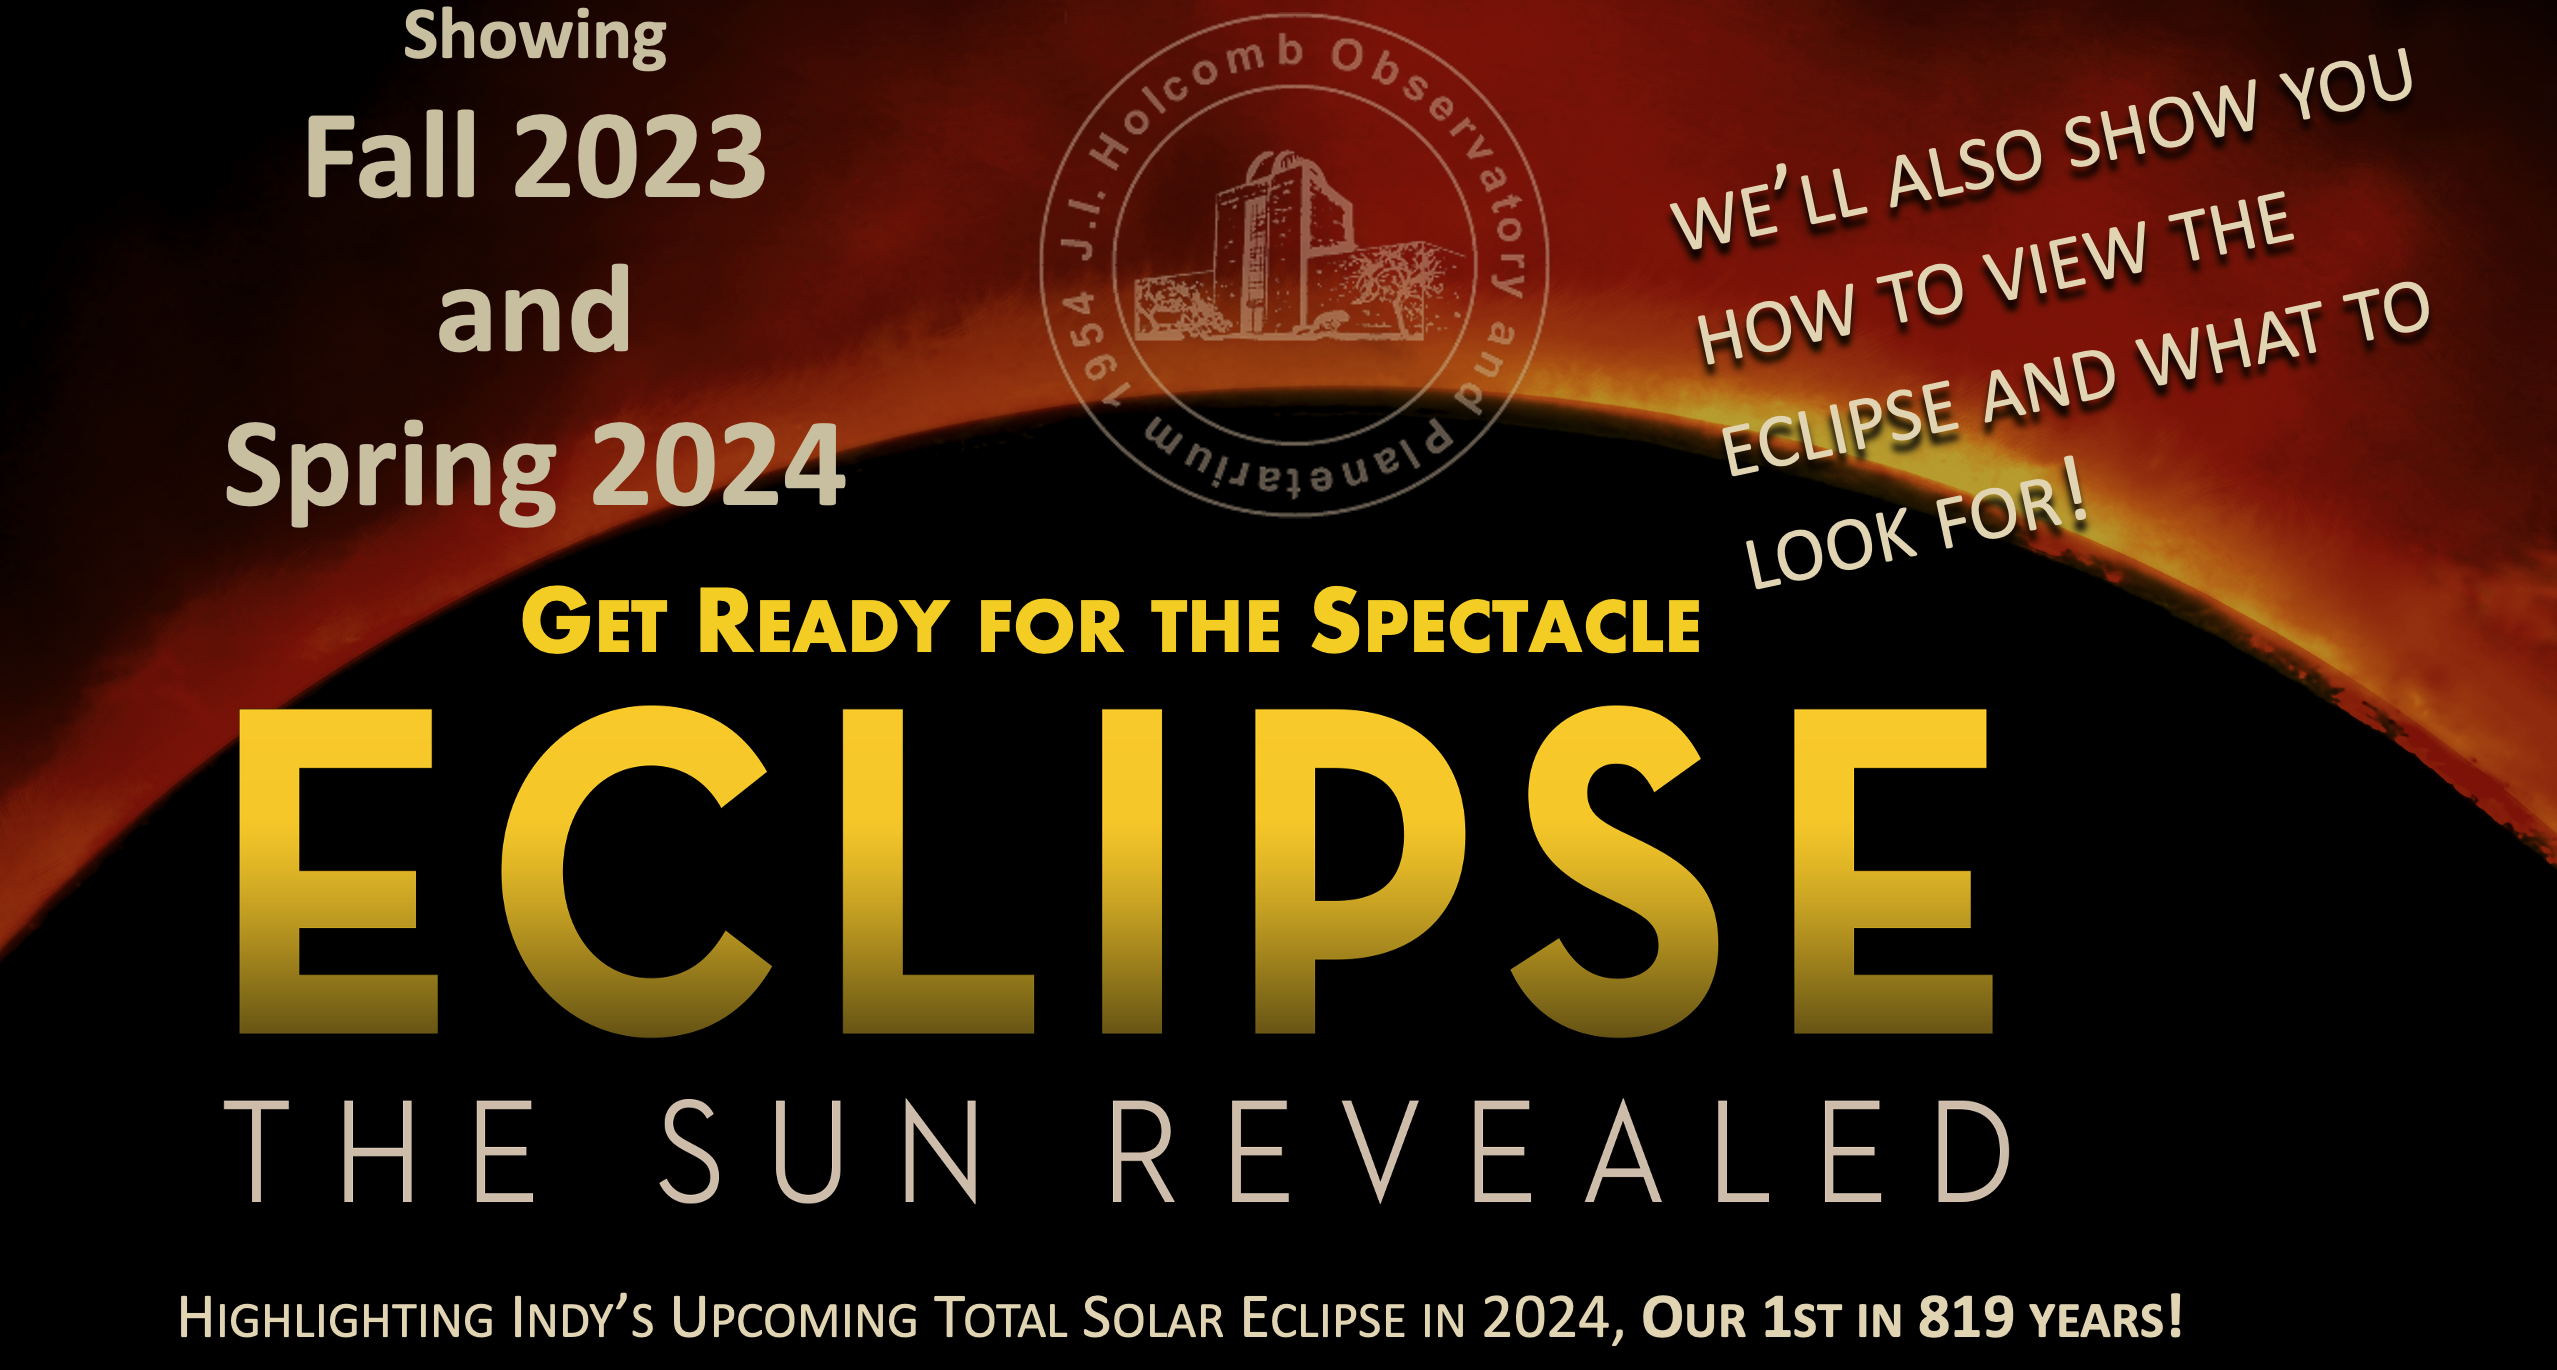 A picture of showing the upcoming planetarium show Eclipse; The Sun Revelaed